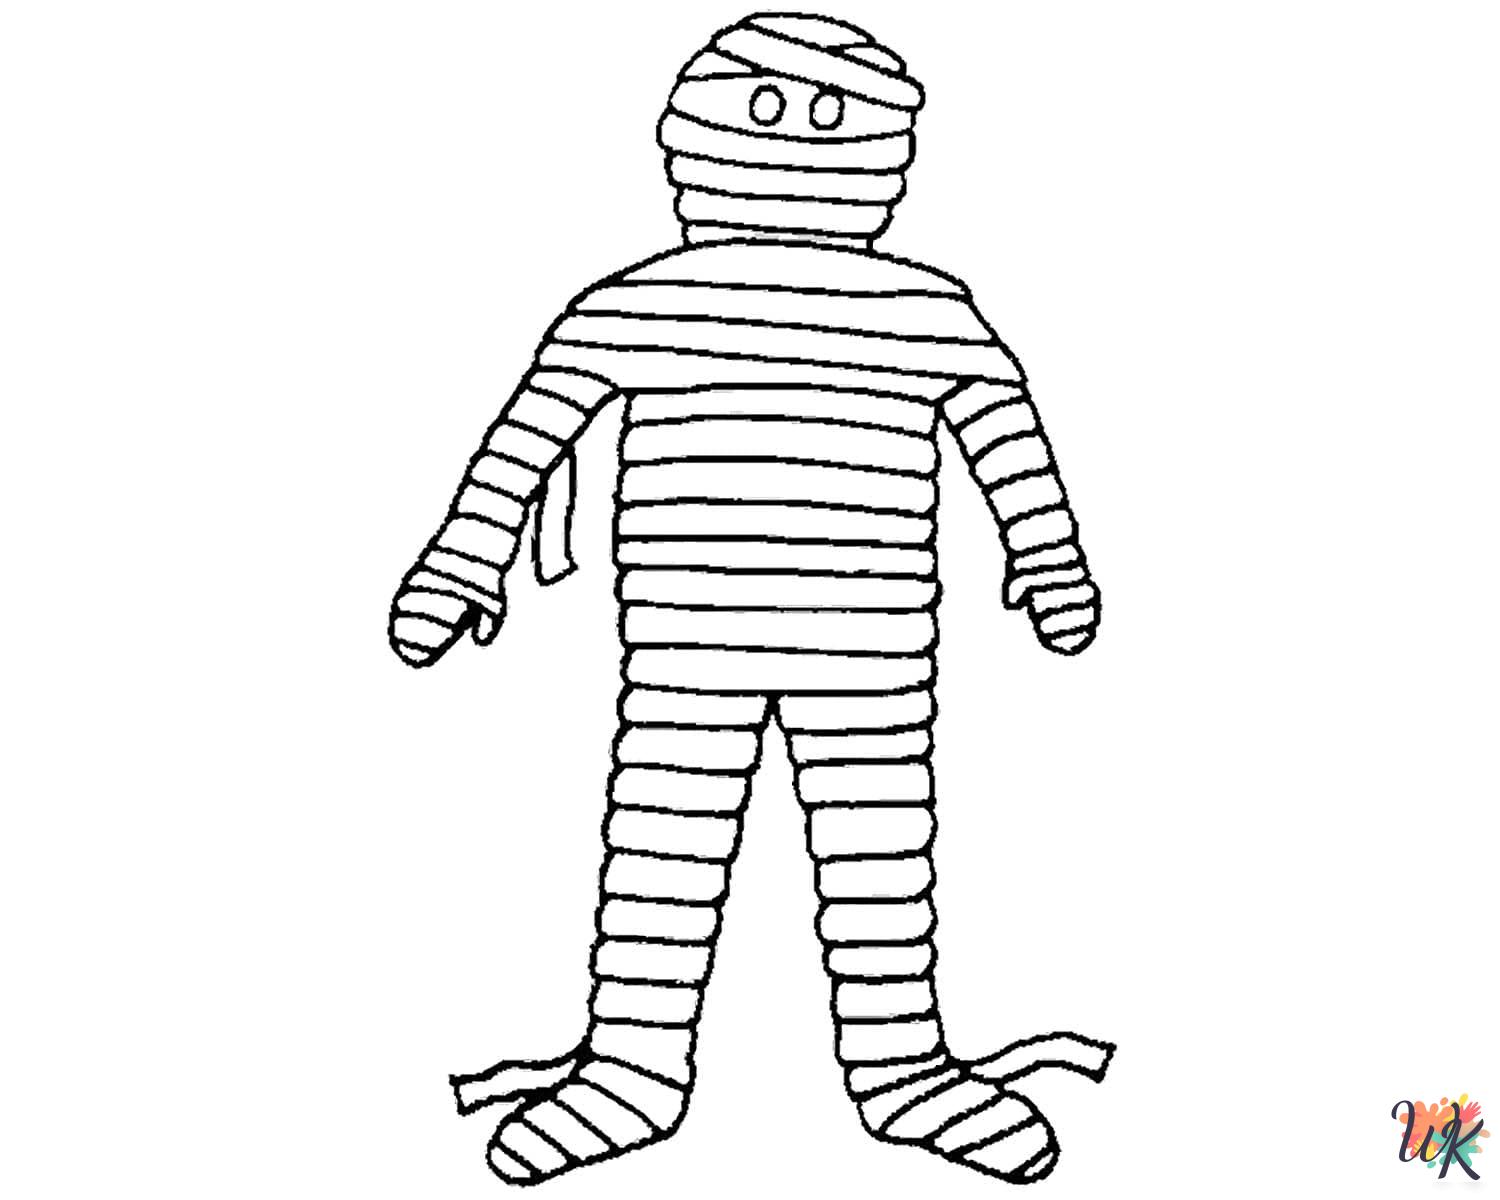 Mummy coloring pages printable free